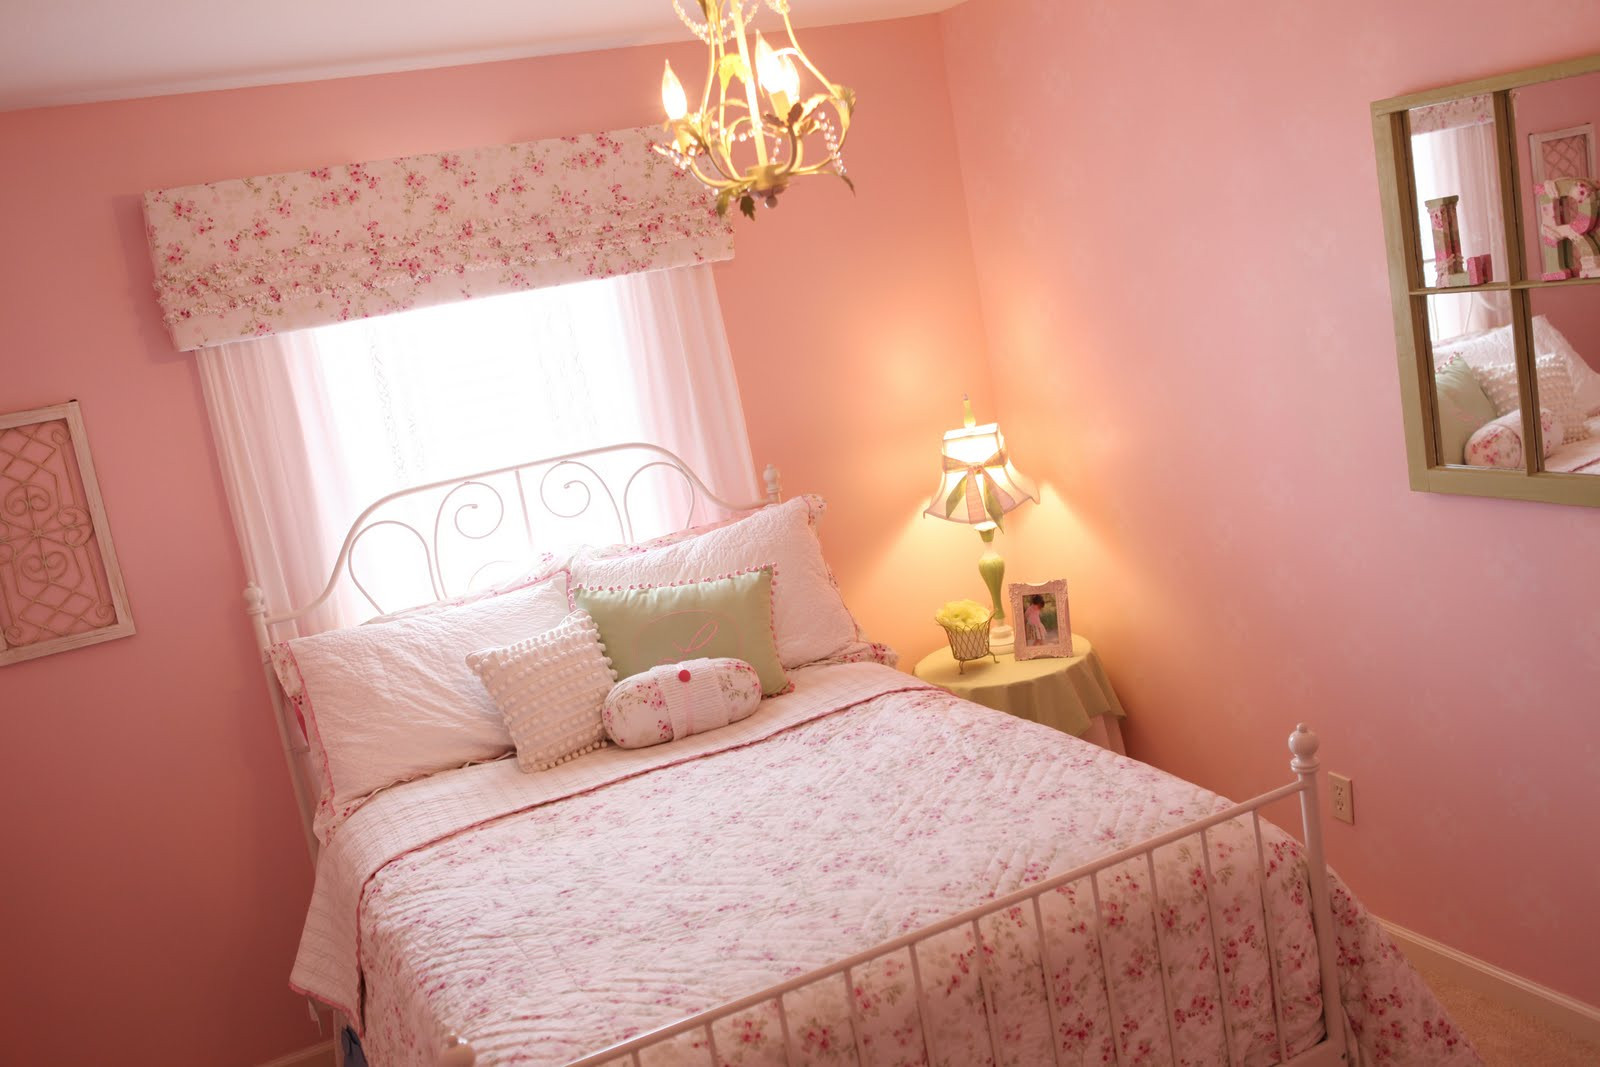 Girls Bedroom Painting Ideas
 Girls Room Paint Ideas with Feminine Touch Amaza Design